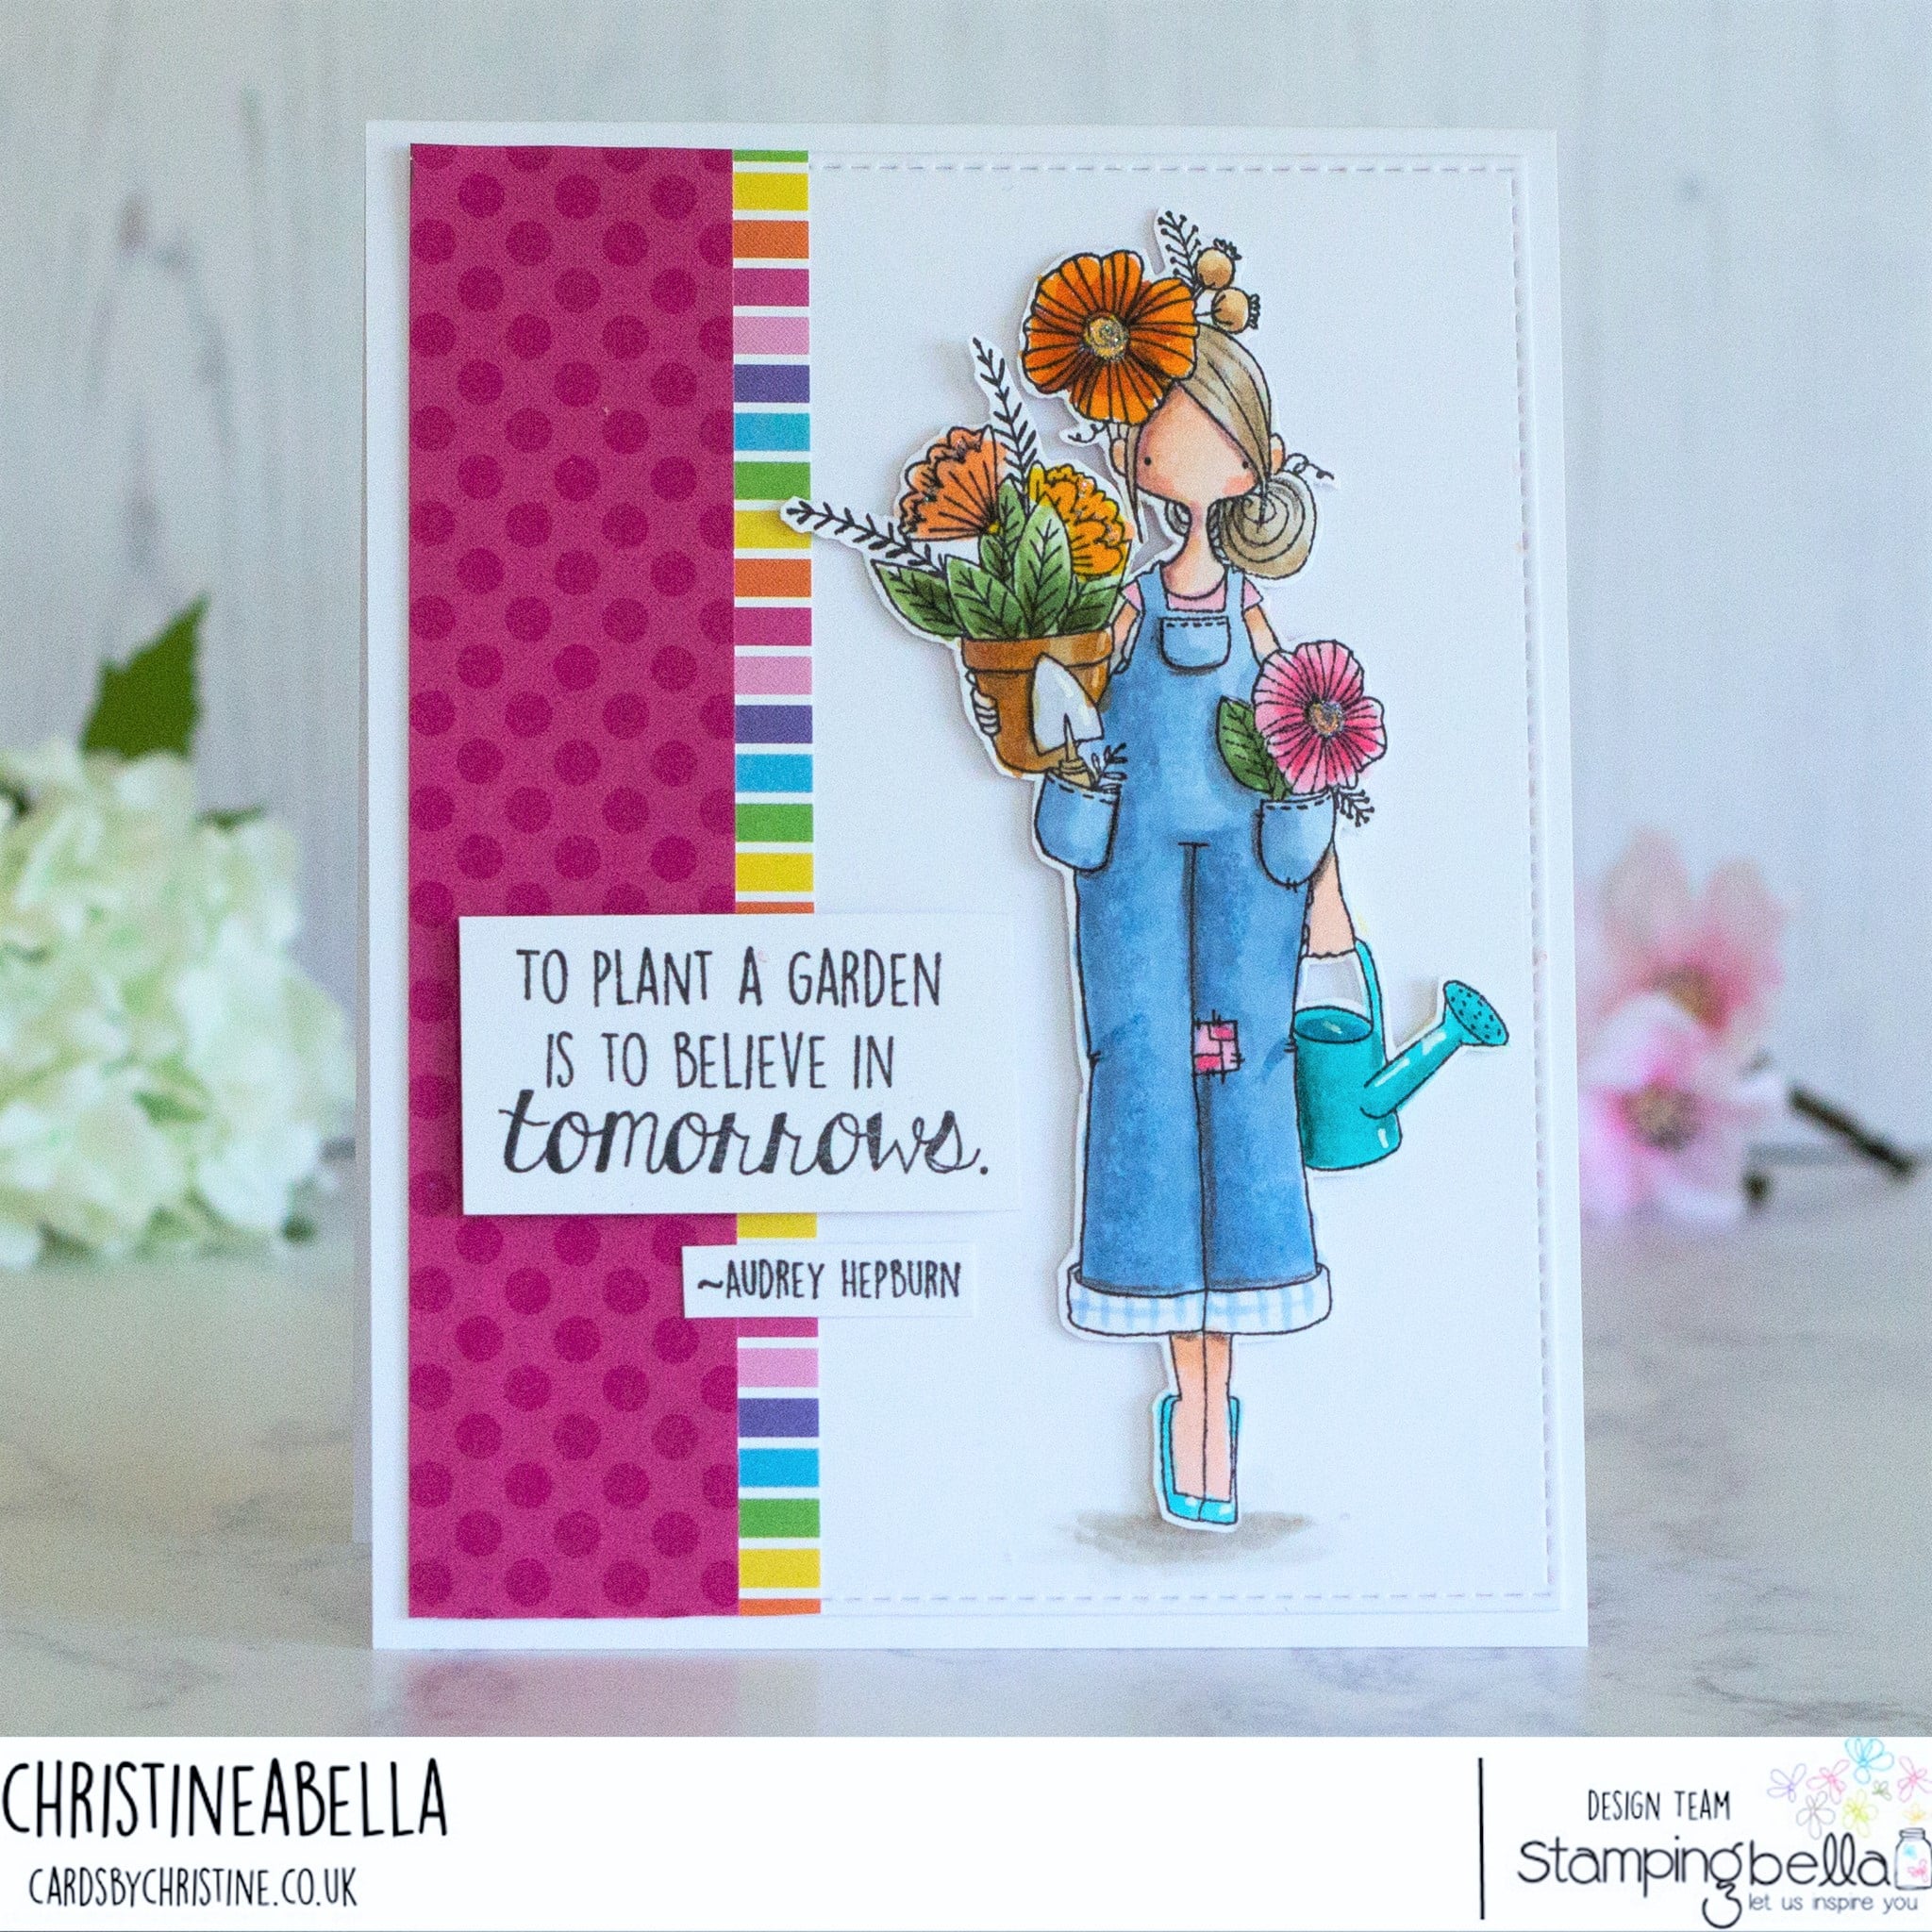 www.stampingbella.com: rubber stamp used: CURVY GIRL GARDENER card by Christine Levison